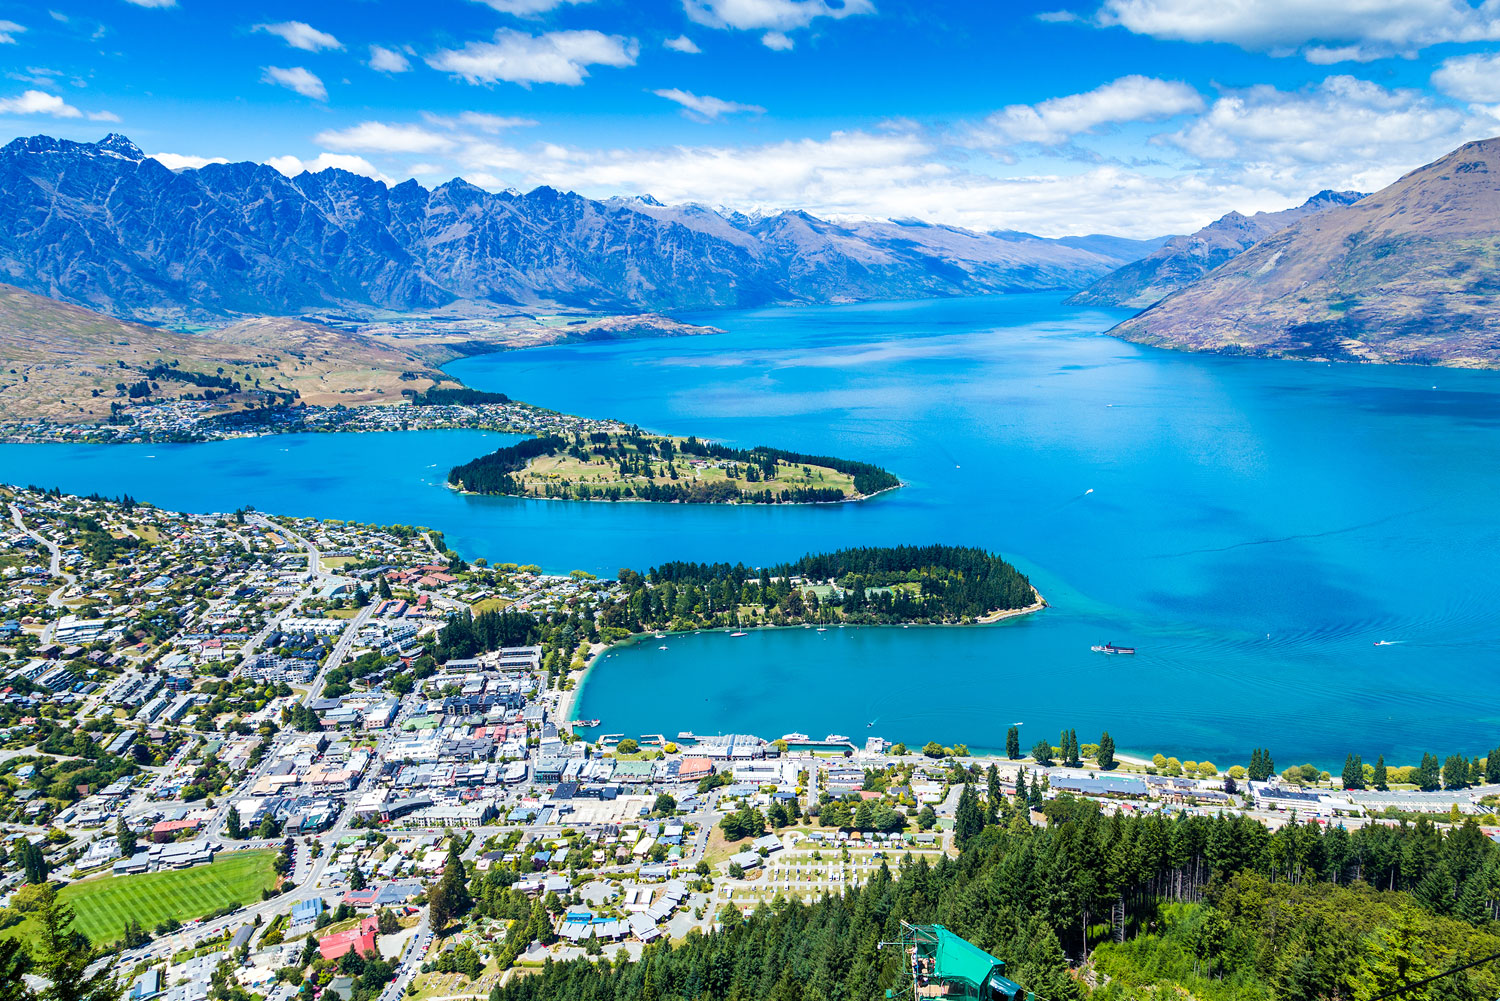 Queenstown on New Zealand's South Island.